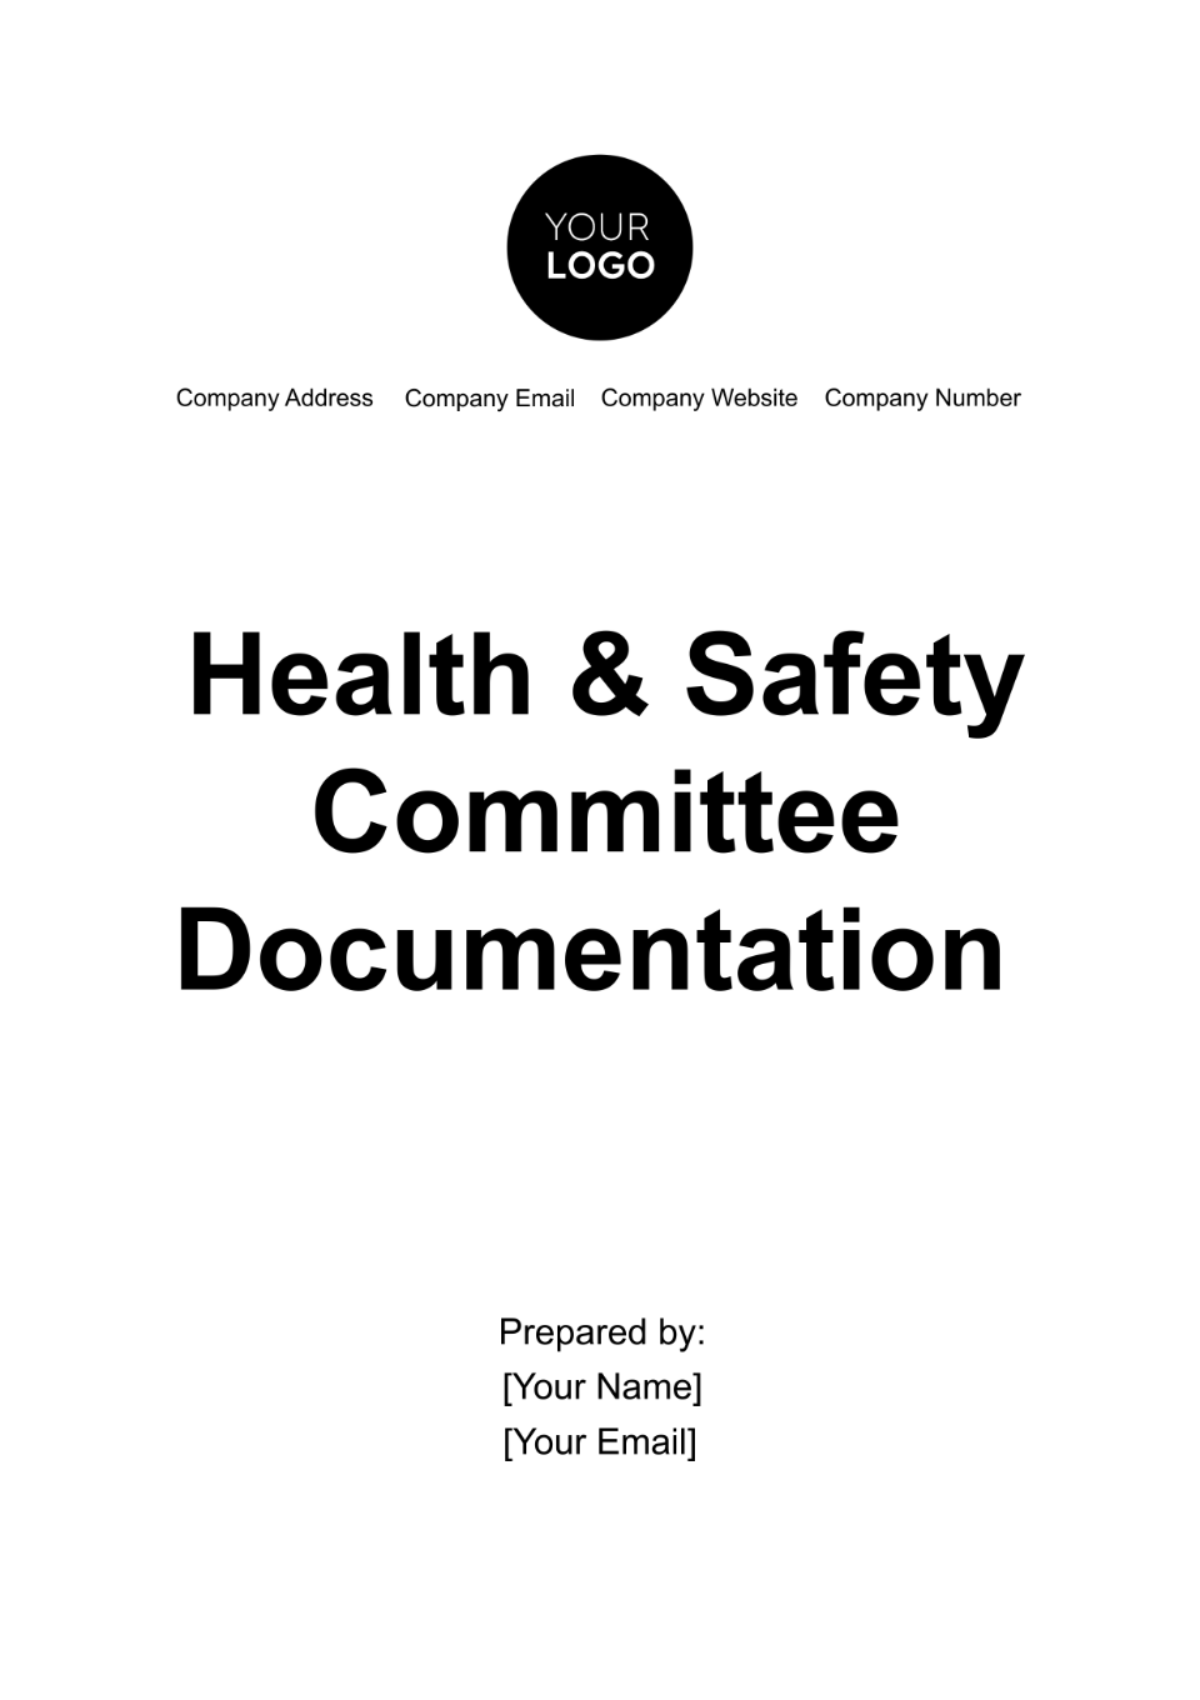 Health & Safety Committee Documentation Template